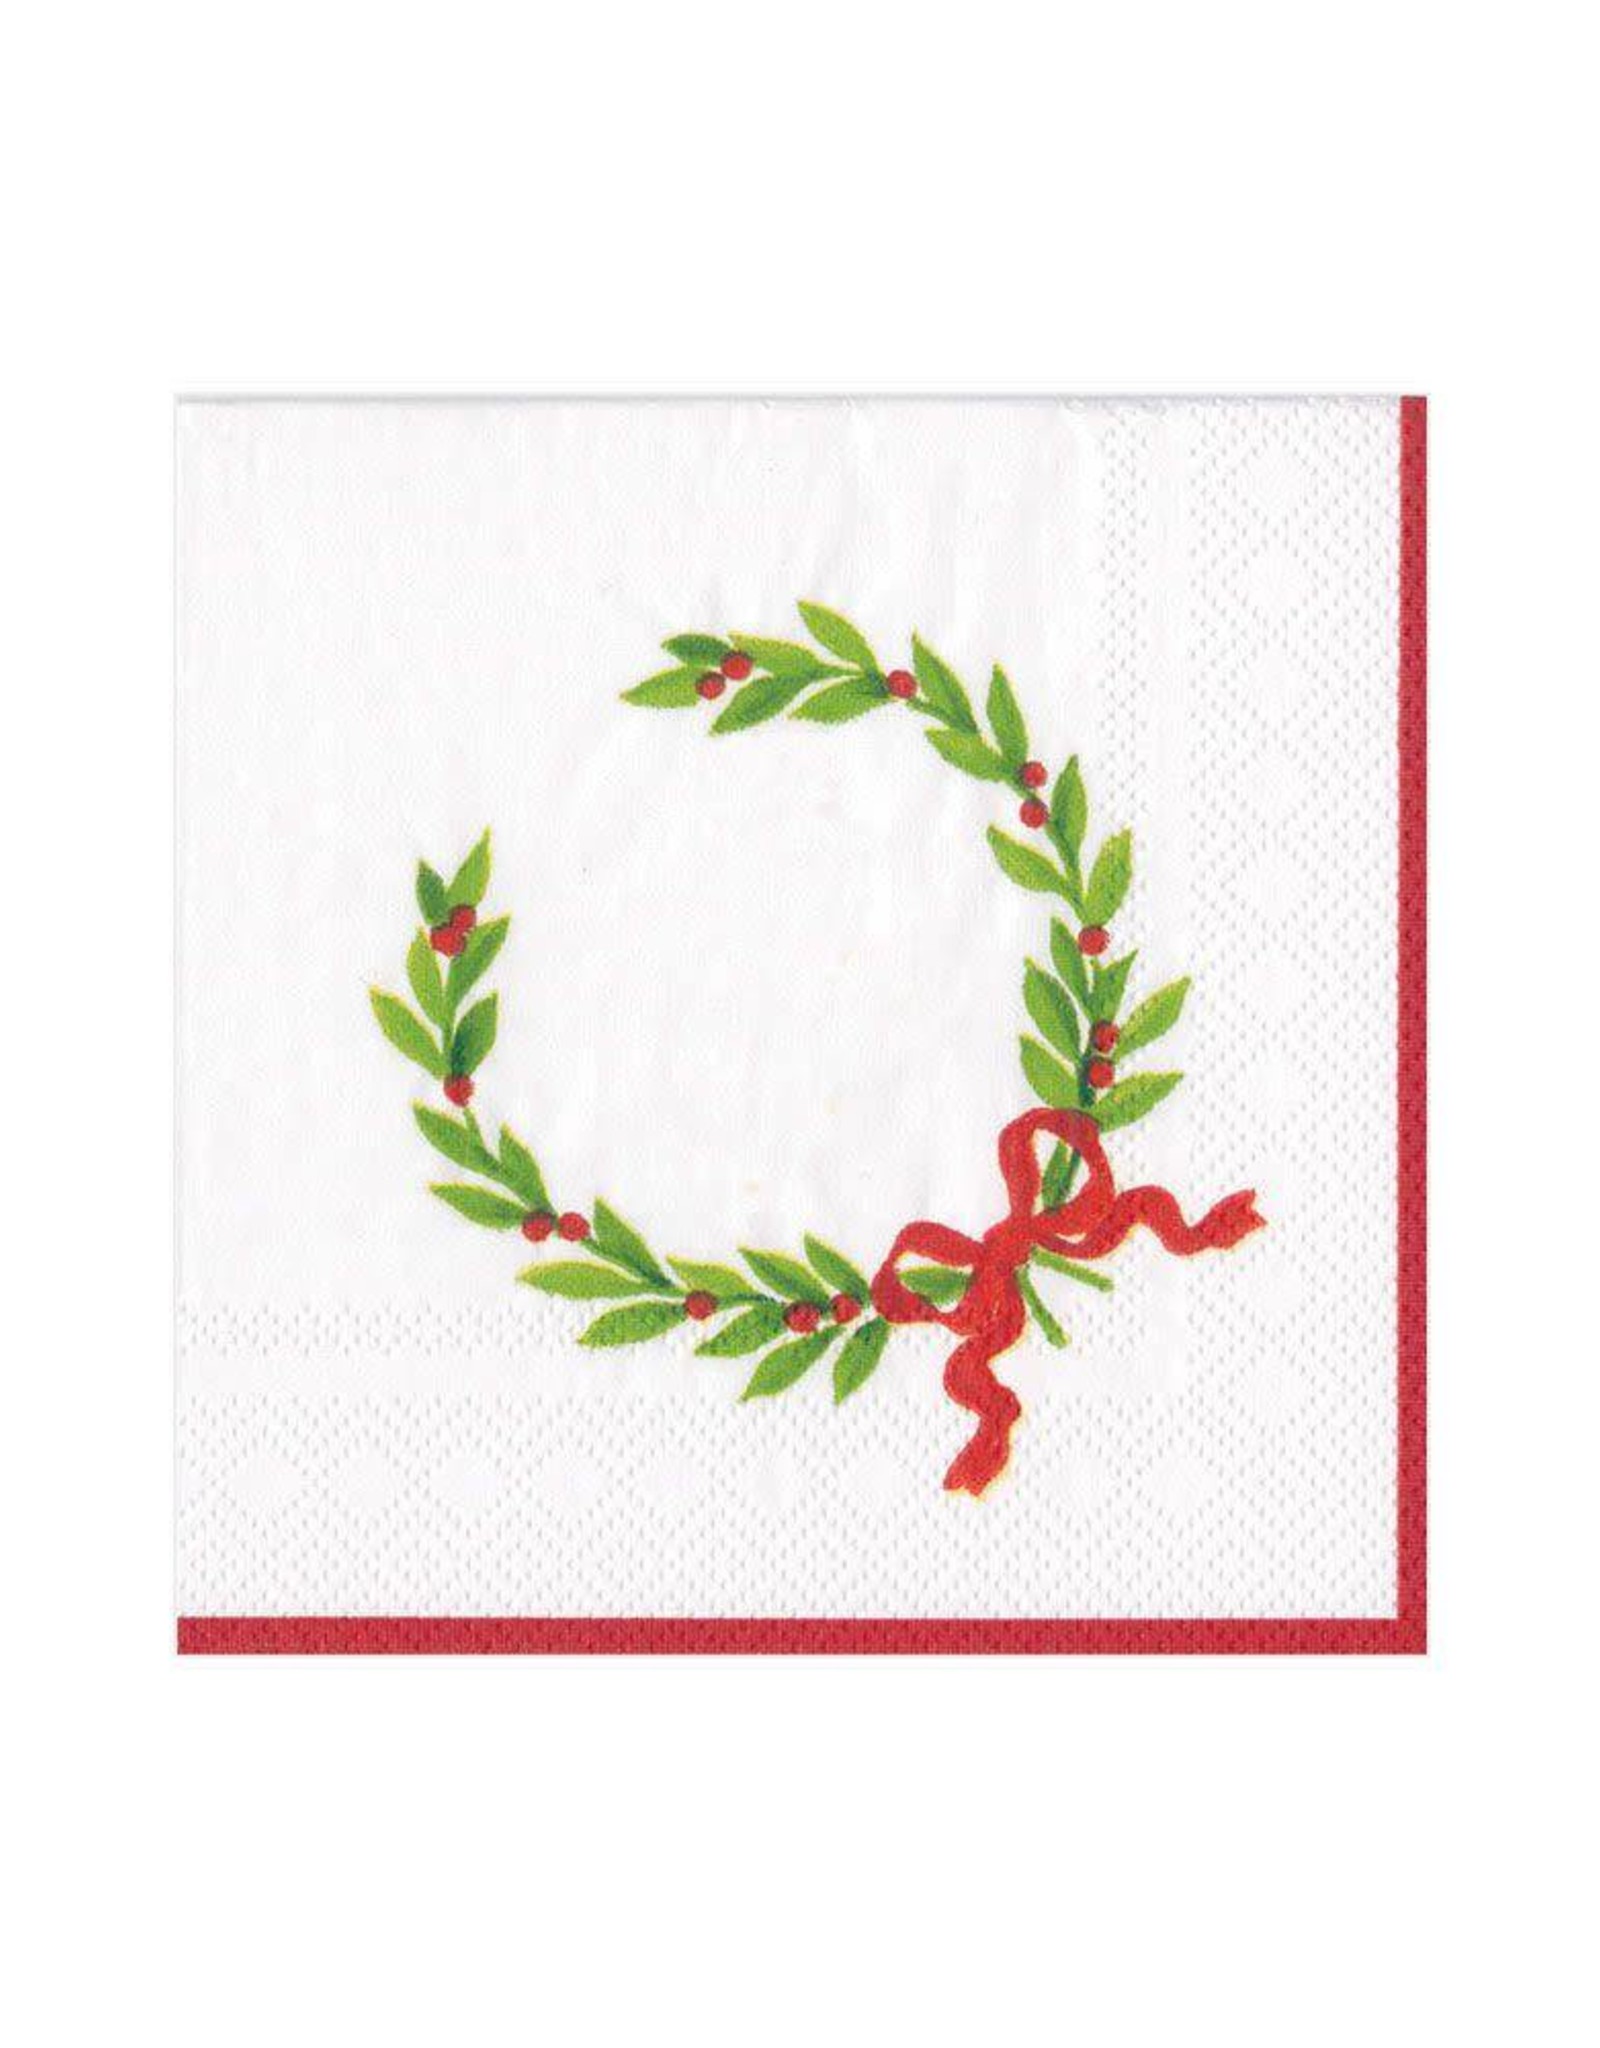 Christmas Laurel Wreath with Initial "B" Beverage Napkin (20ct)